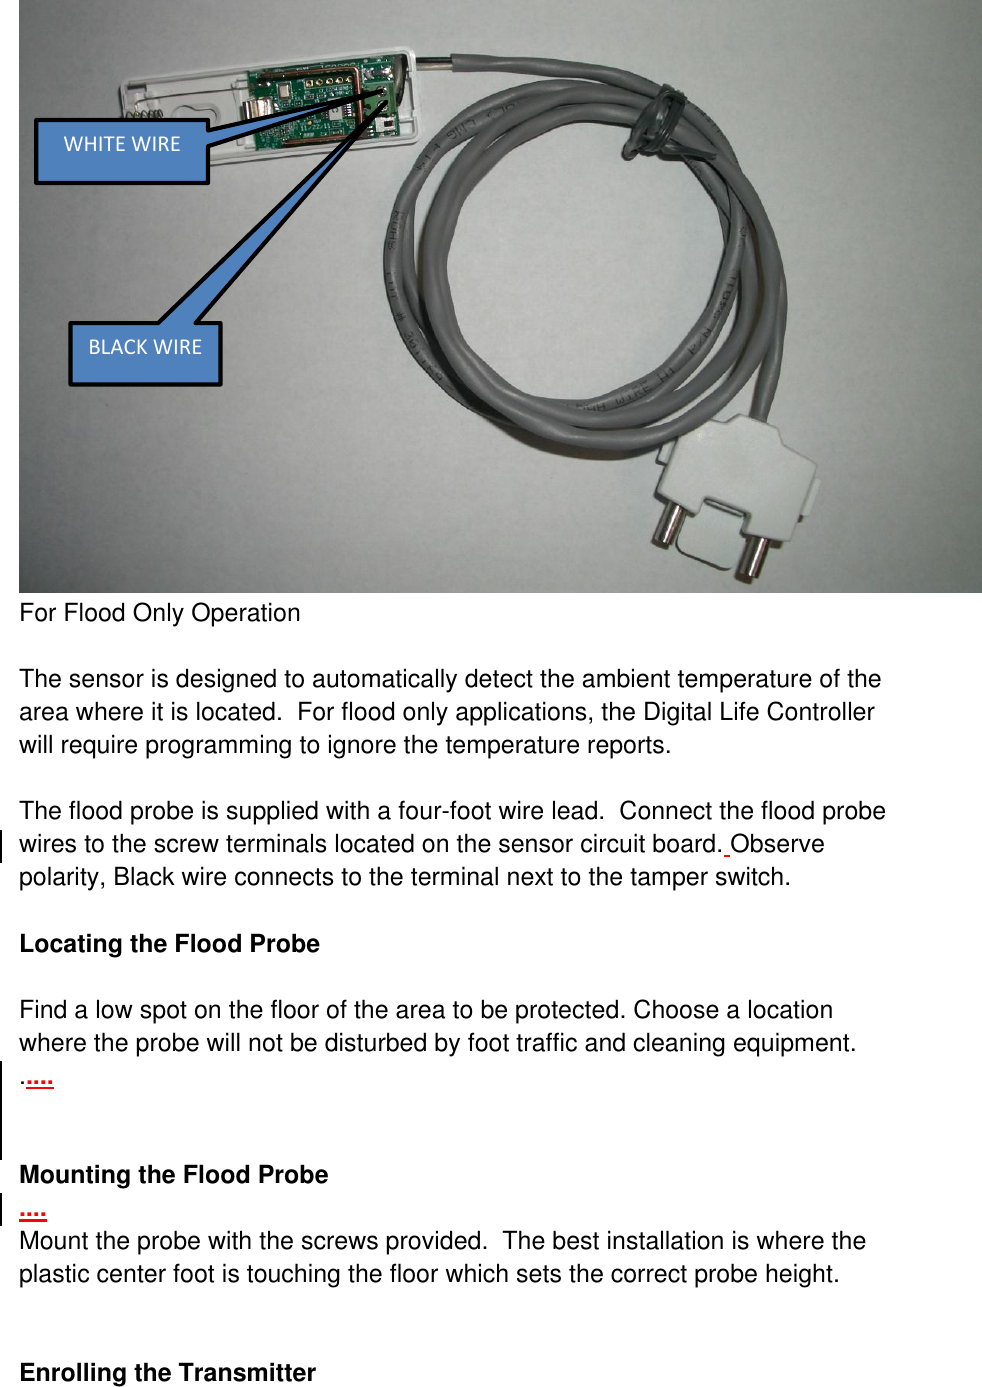  For Flood Only Operation  The sensor is designed to automatically detect the ambient temperature of the area where it is located.  For flood only applications, the Digital Life Controller will require programming to ignore the temperature reports.  The flood probe is supplied with a four-foot wire lead.  Connect the flood probe wires to the screw terminals located on the sensor circuit board. Observe polarity, Black wire connects to the terminal next to the tamper switch.  Locating the Flood Probe  Find a low spot on the floor of the area to be protected. Choose a location where the probe will not be disturbed by foot traffic and cleaning equipment. .....   Mounting the Flood Probe .... Mount the probe with the screws provided.  The best installation is where the plastic center foot is touching the floor which sets the correct probe height.   Enrolling the Transmitter  WHITE WIRE BLACK WIRE 